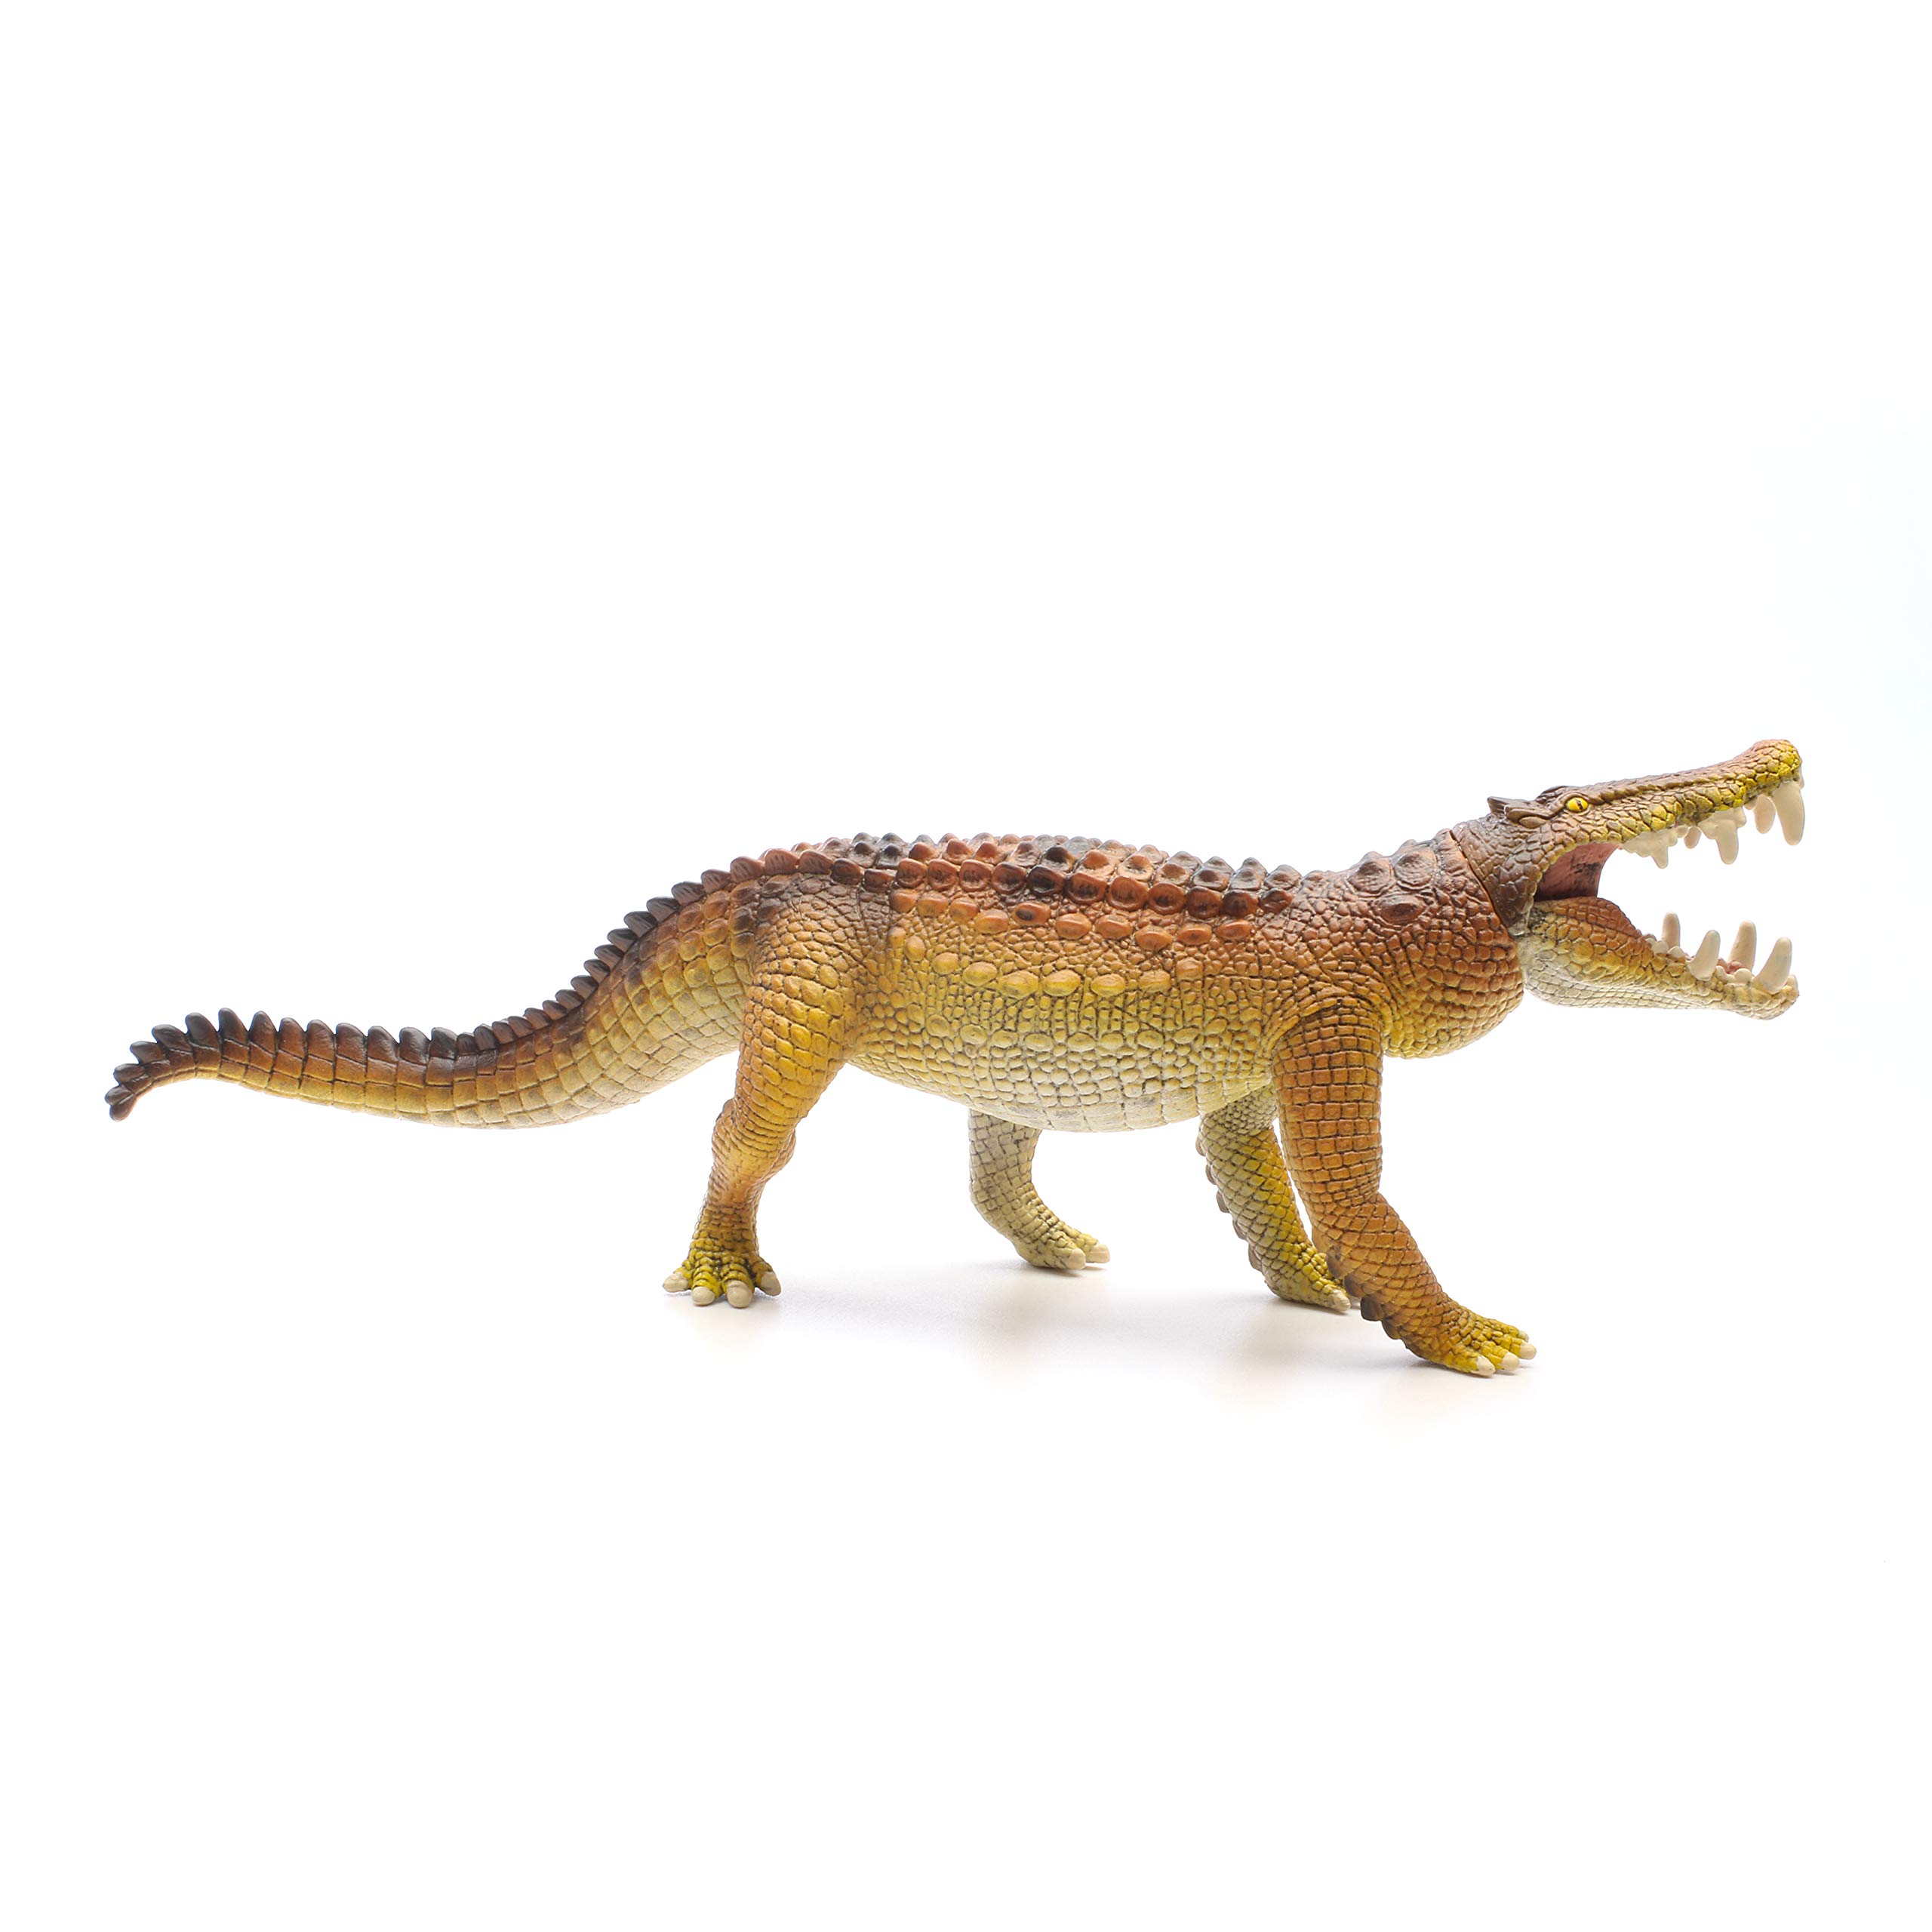 Schleich Dinosaurs, Large Dinosaur Toys for Boys and Girls, Realistic Kaprosuchus Toy with Movable Jaw, Ages 4+